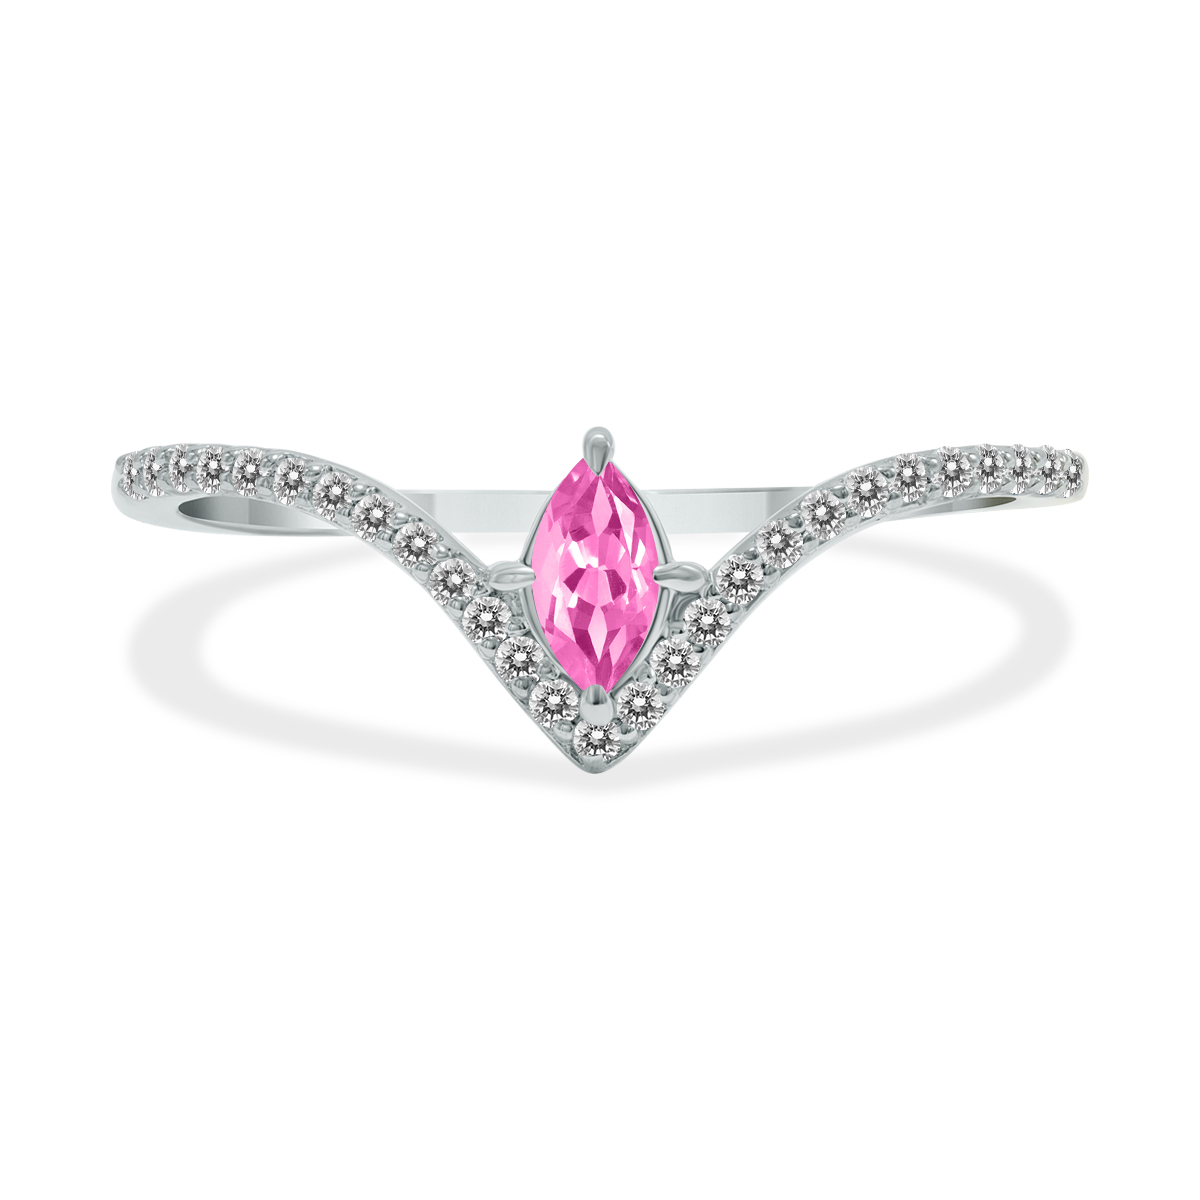 Image of 1/4 Carat TW Pink Topaz and Diamond V Shape Ring in 10K White Gold